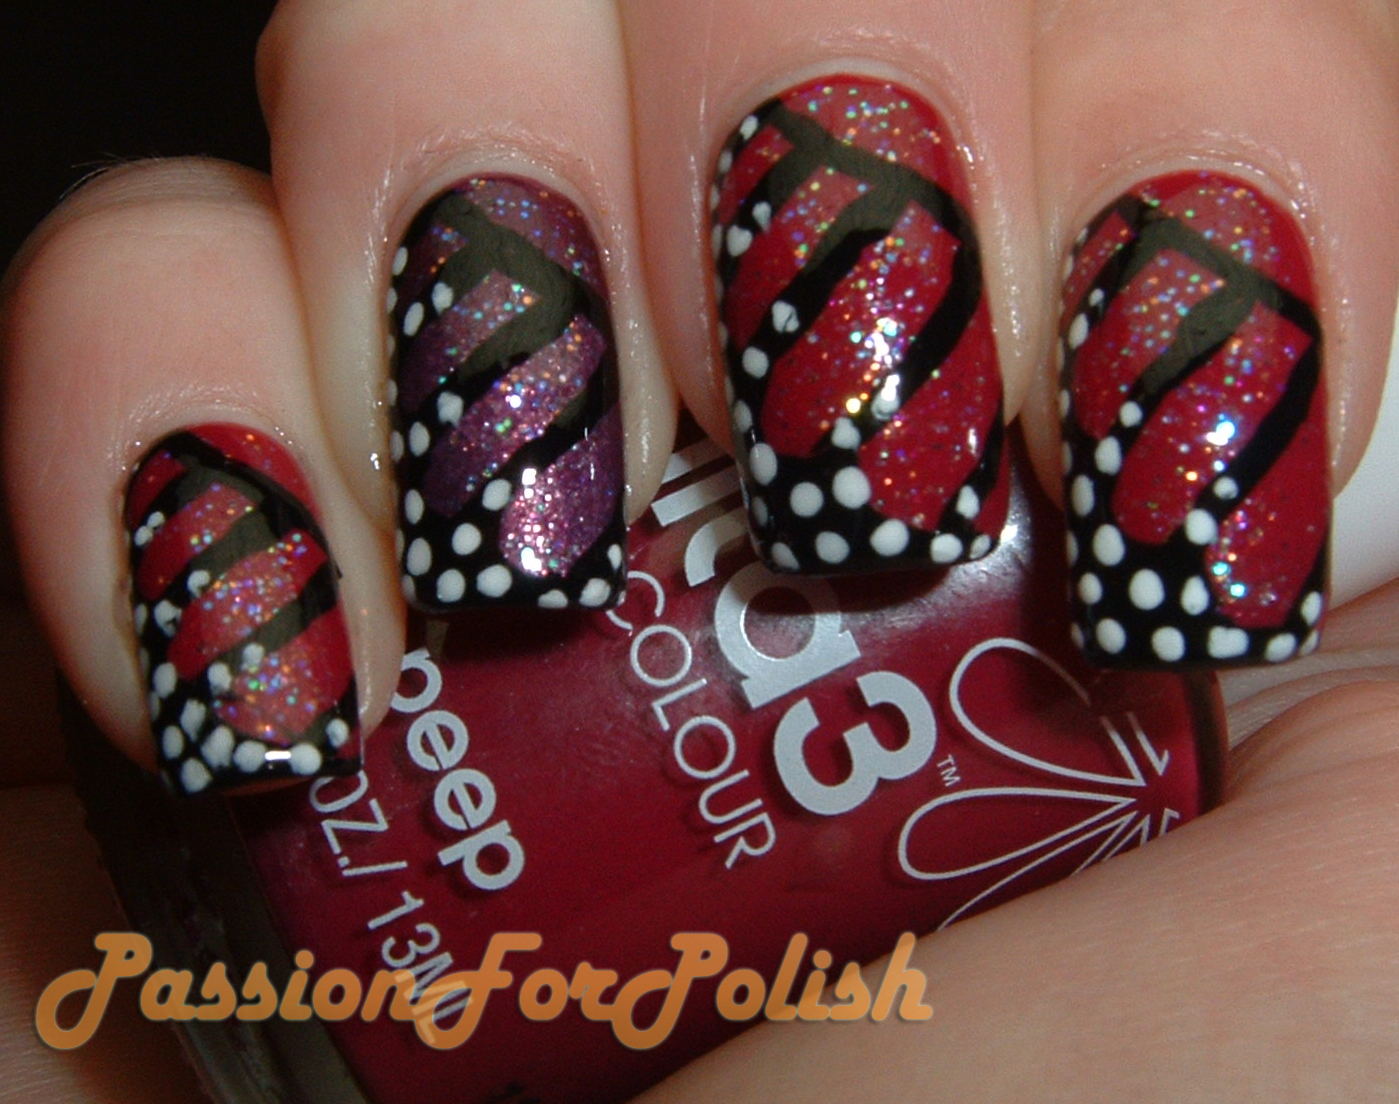 PassionForPolish: Sparkly Butterfly Nails (Pic Heavy)